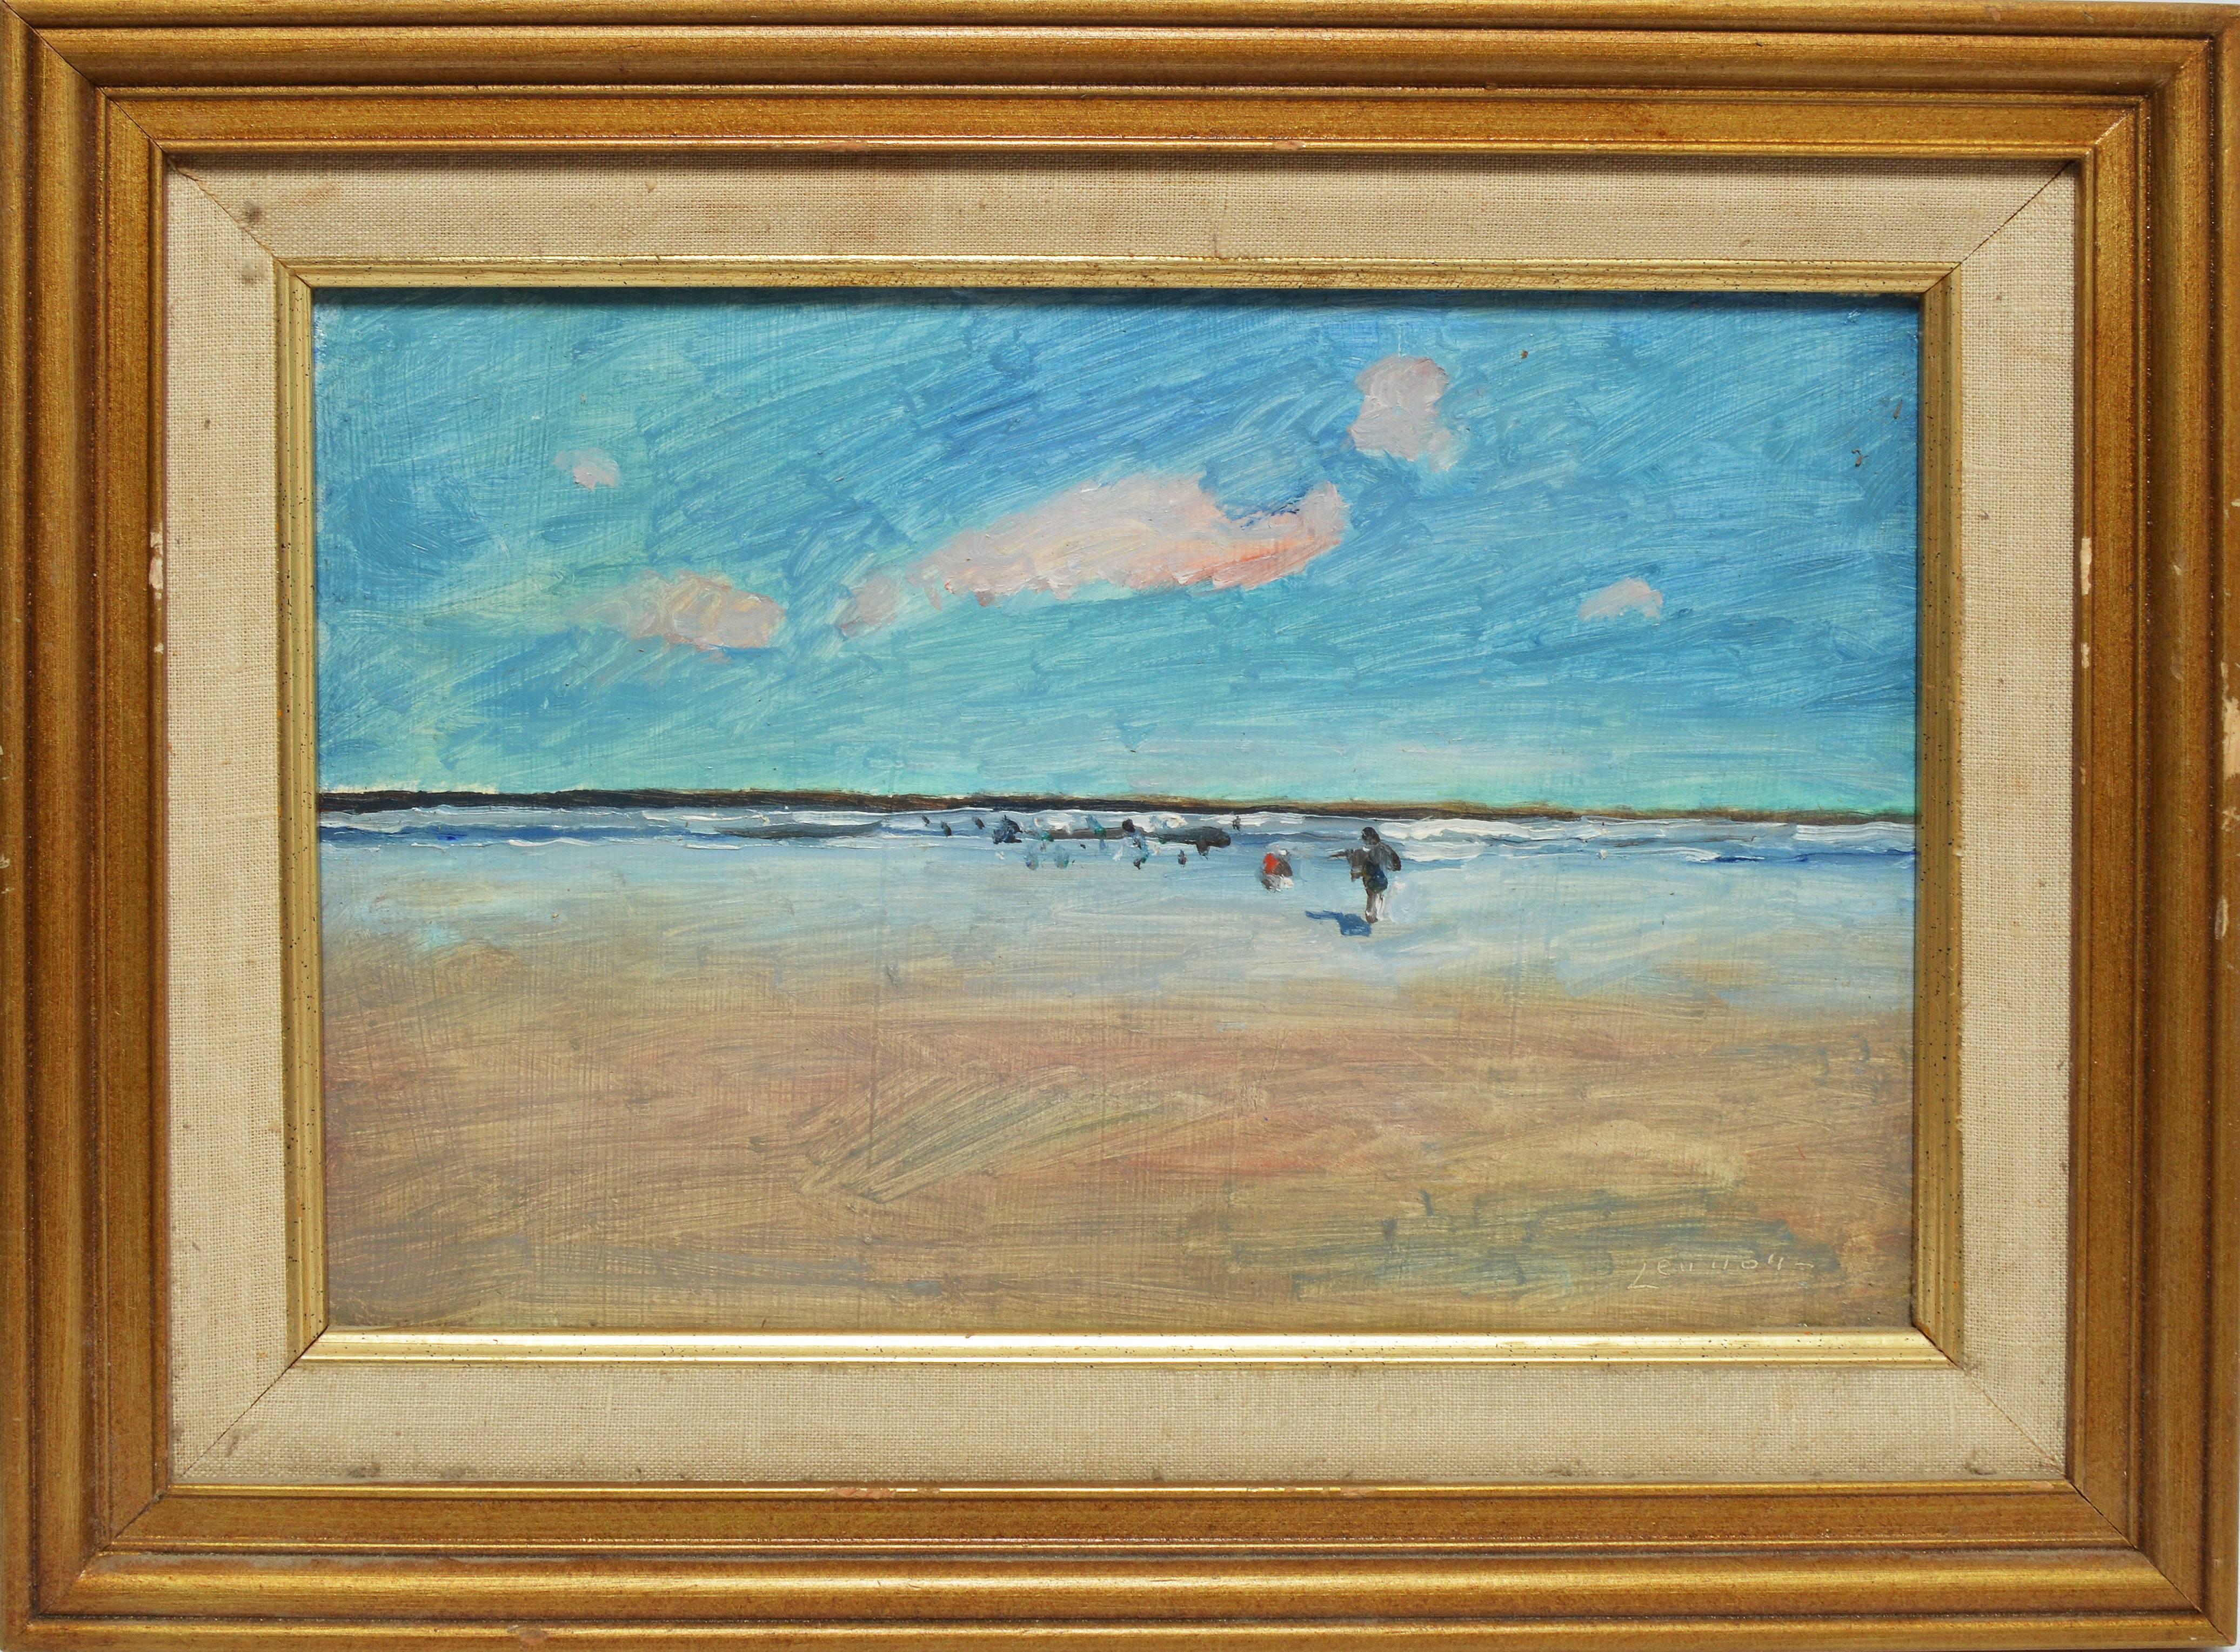 Modernist beach view by Bernard Lennon  (1914 - 1992).  Oil on board, circa 1940.  Signed lower right.  Displayed in a period frame.  Image size, 12"L x 8"H, overall 16"L x 12"H